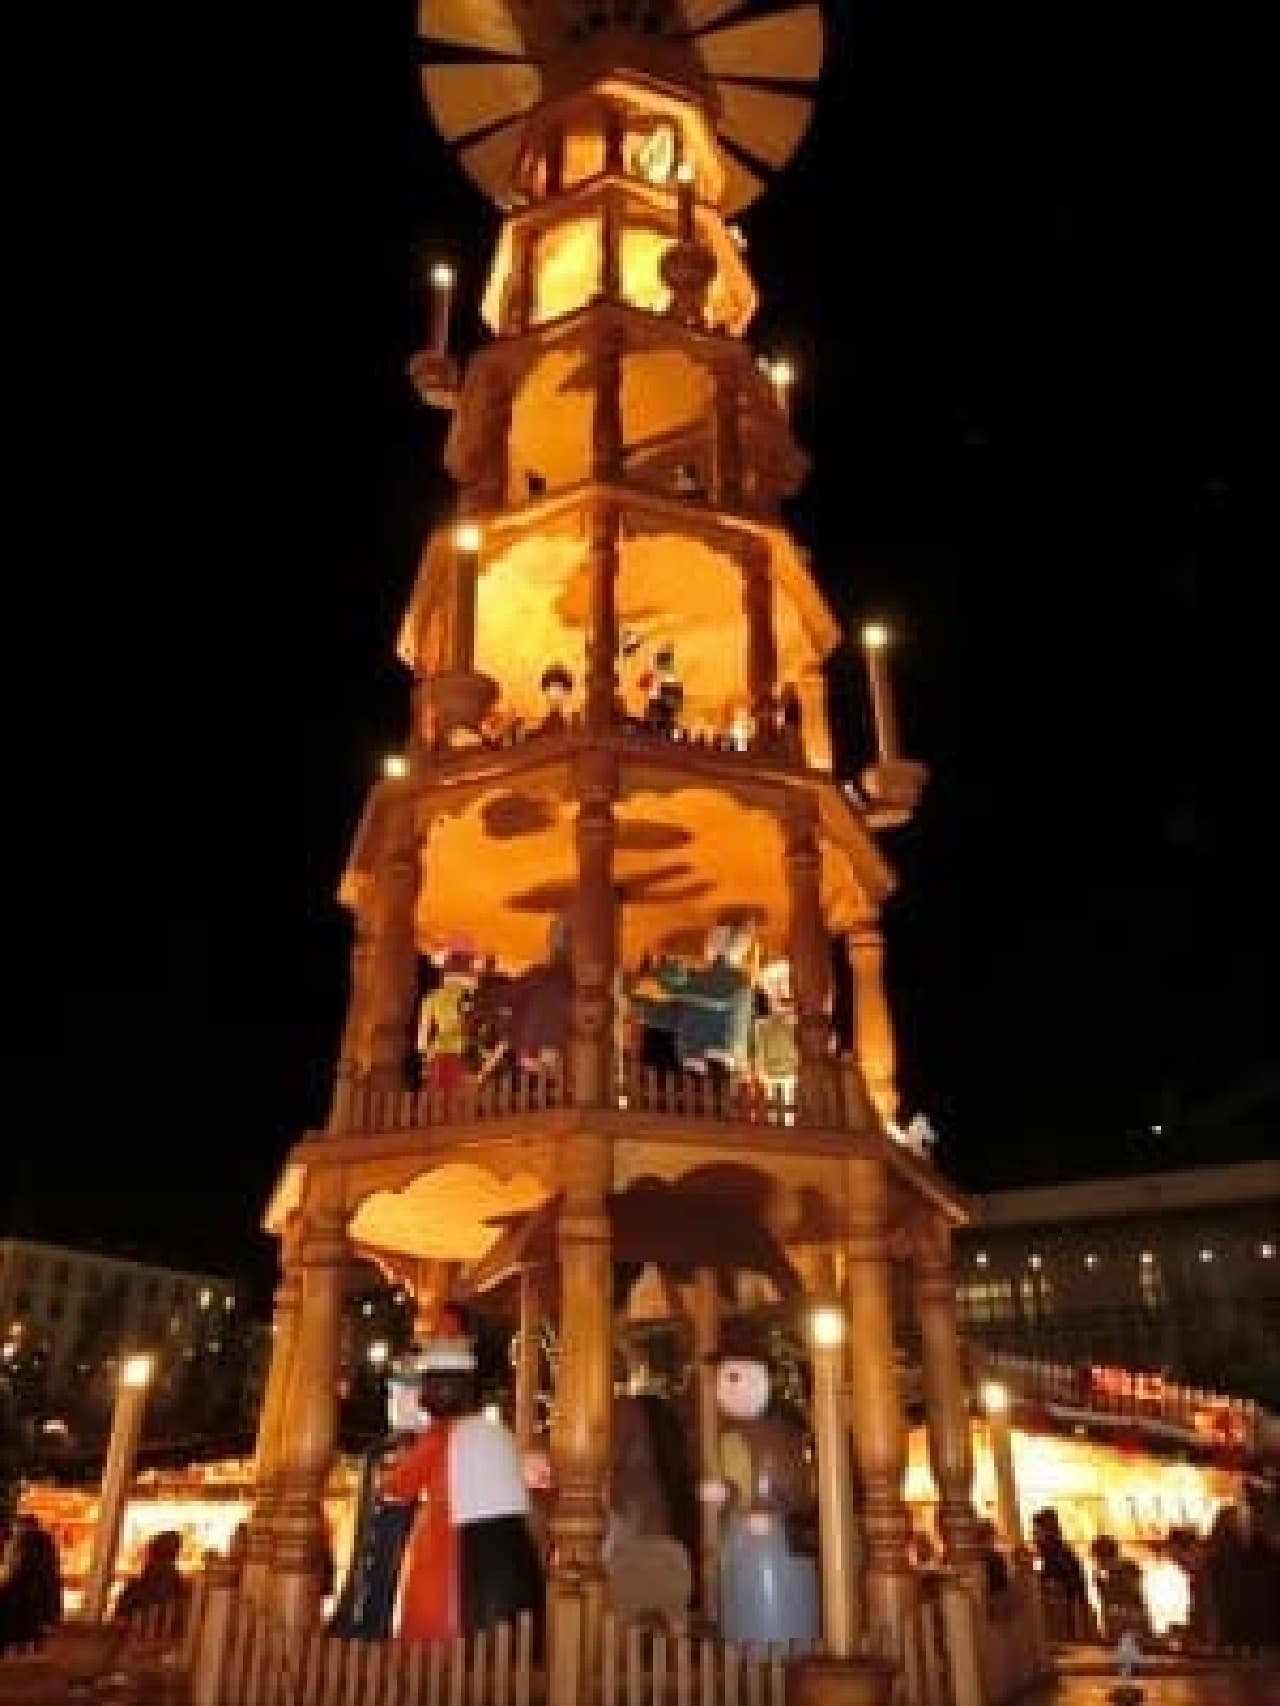 "Christmas Pyramid" from Germany!